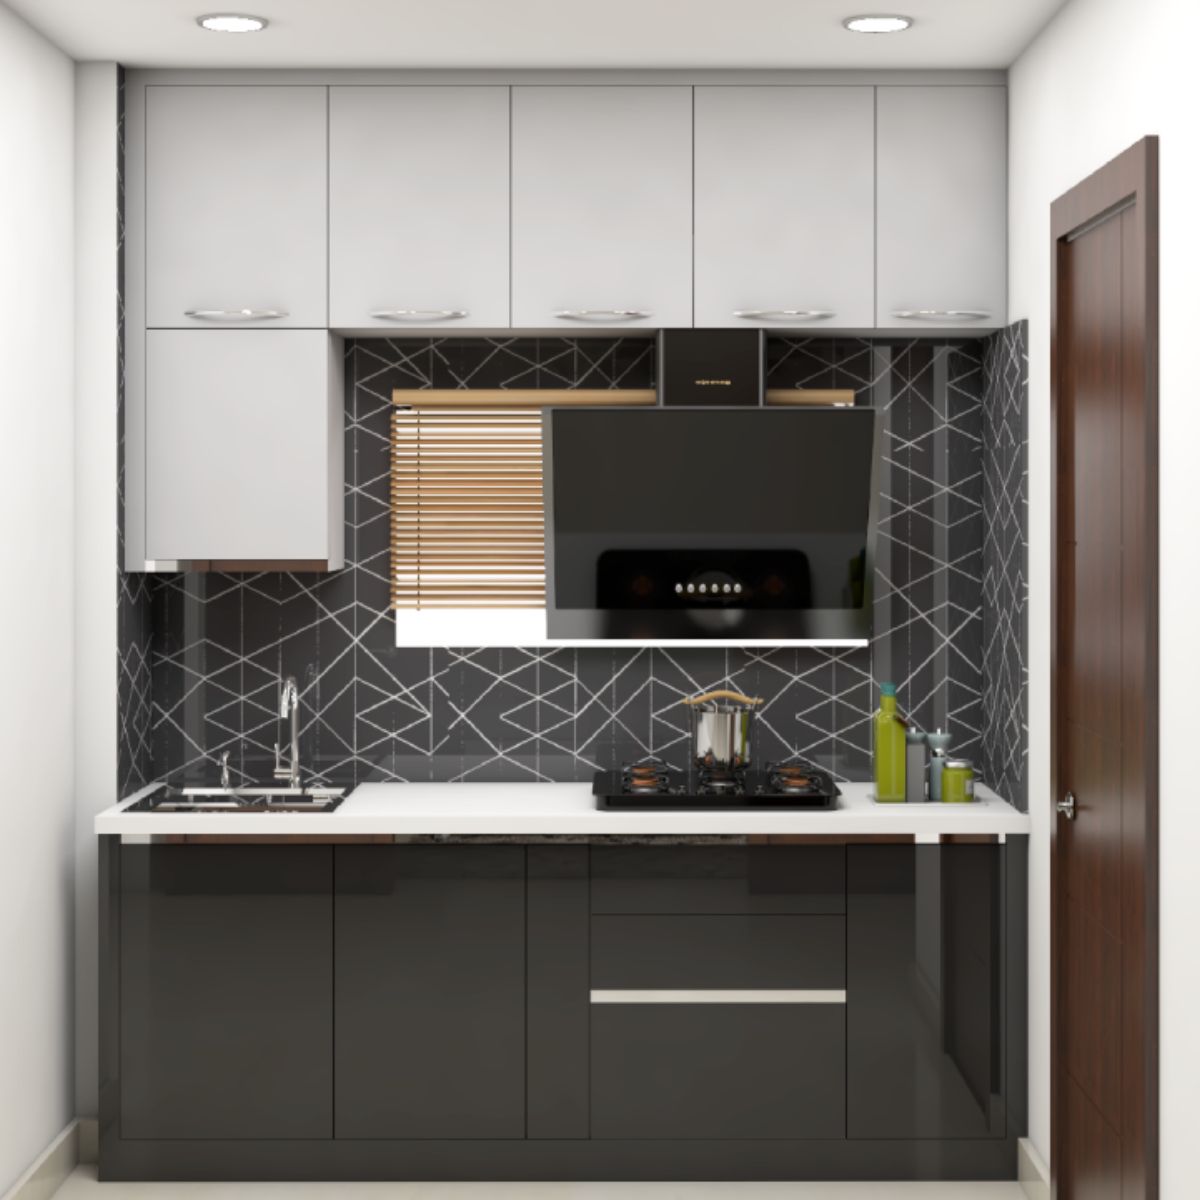 Modern Straight Kitchen Design With Patterned Dado Tiles